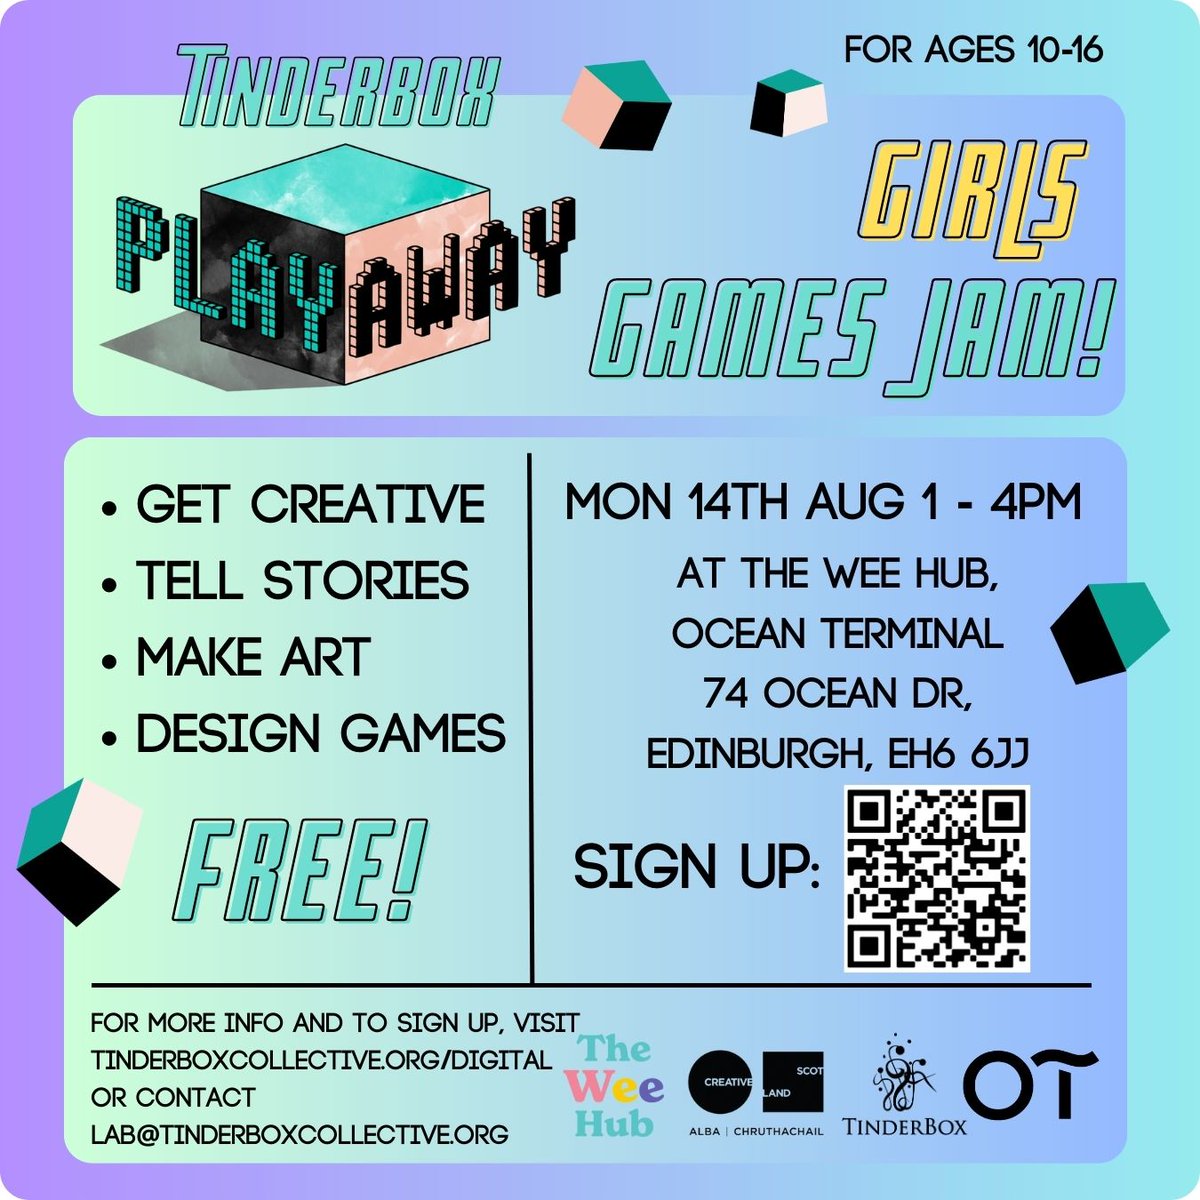 Fancy getting creative with art, music, & learn about making games in the process? Come along to our free upcoming games-making workshops: Girls Game Jam on 👾Mon 14th Aug👾 and a Game Jam on 💫Sun 3rd Sept💫 👉 tinderboxcollective.org/online-games-c… #PlayAwayFest #YoungGameDesigners